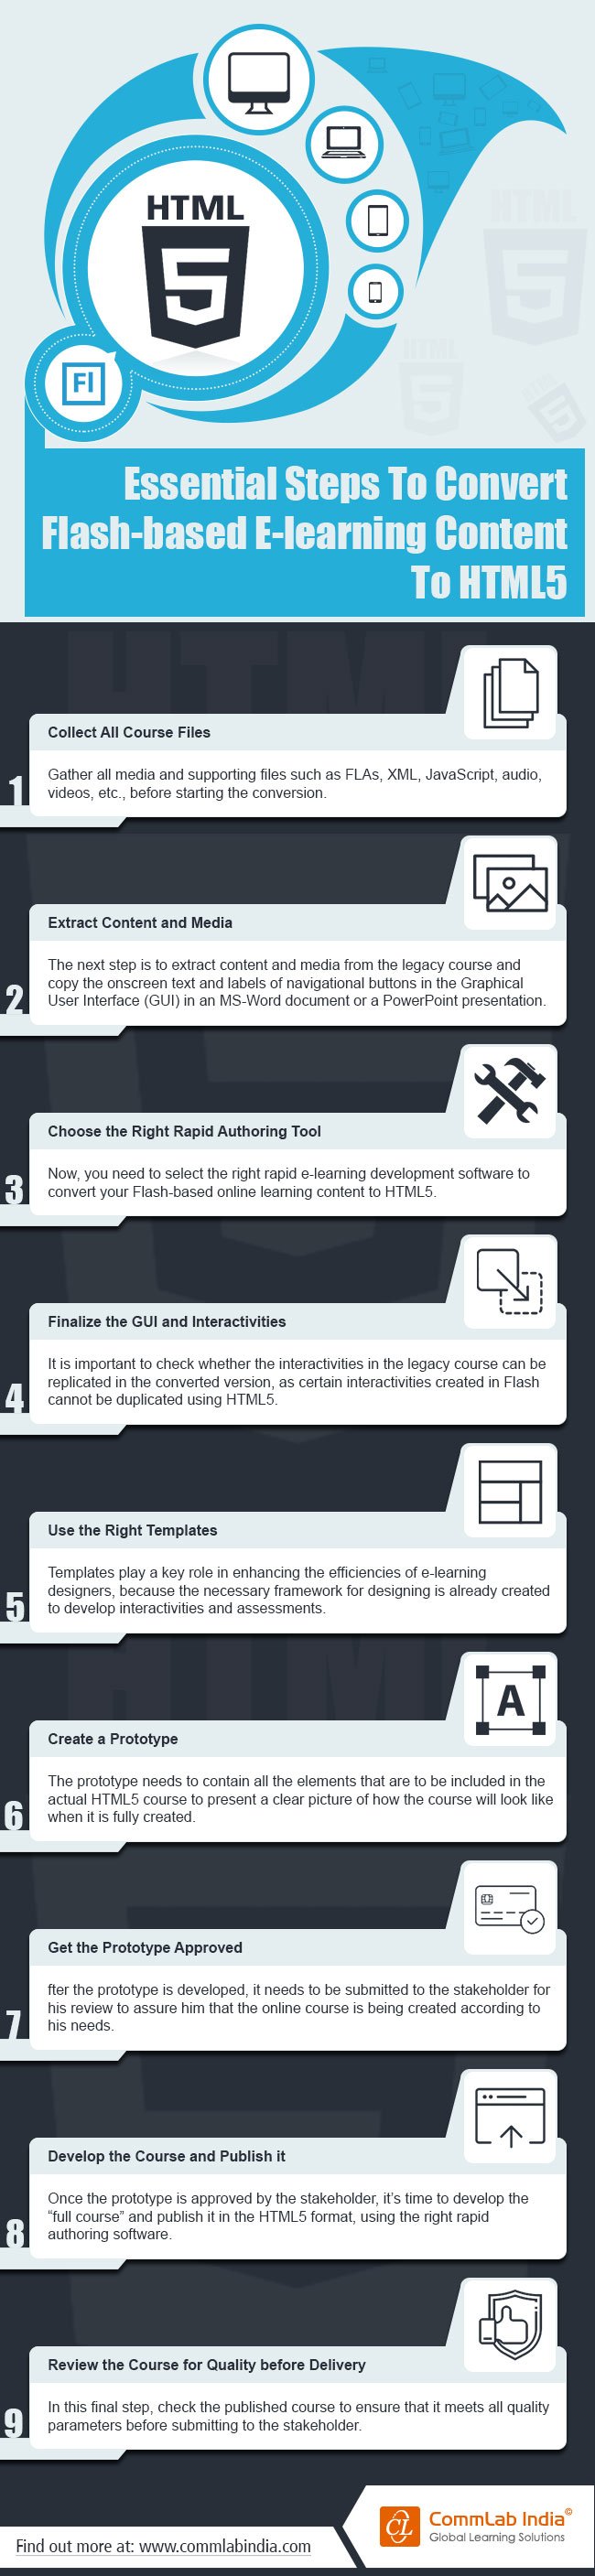 Essential Steps To Convert Flash-based E-learning Content To HTML5 [Infographic]